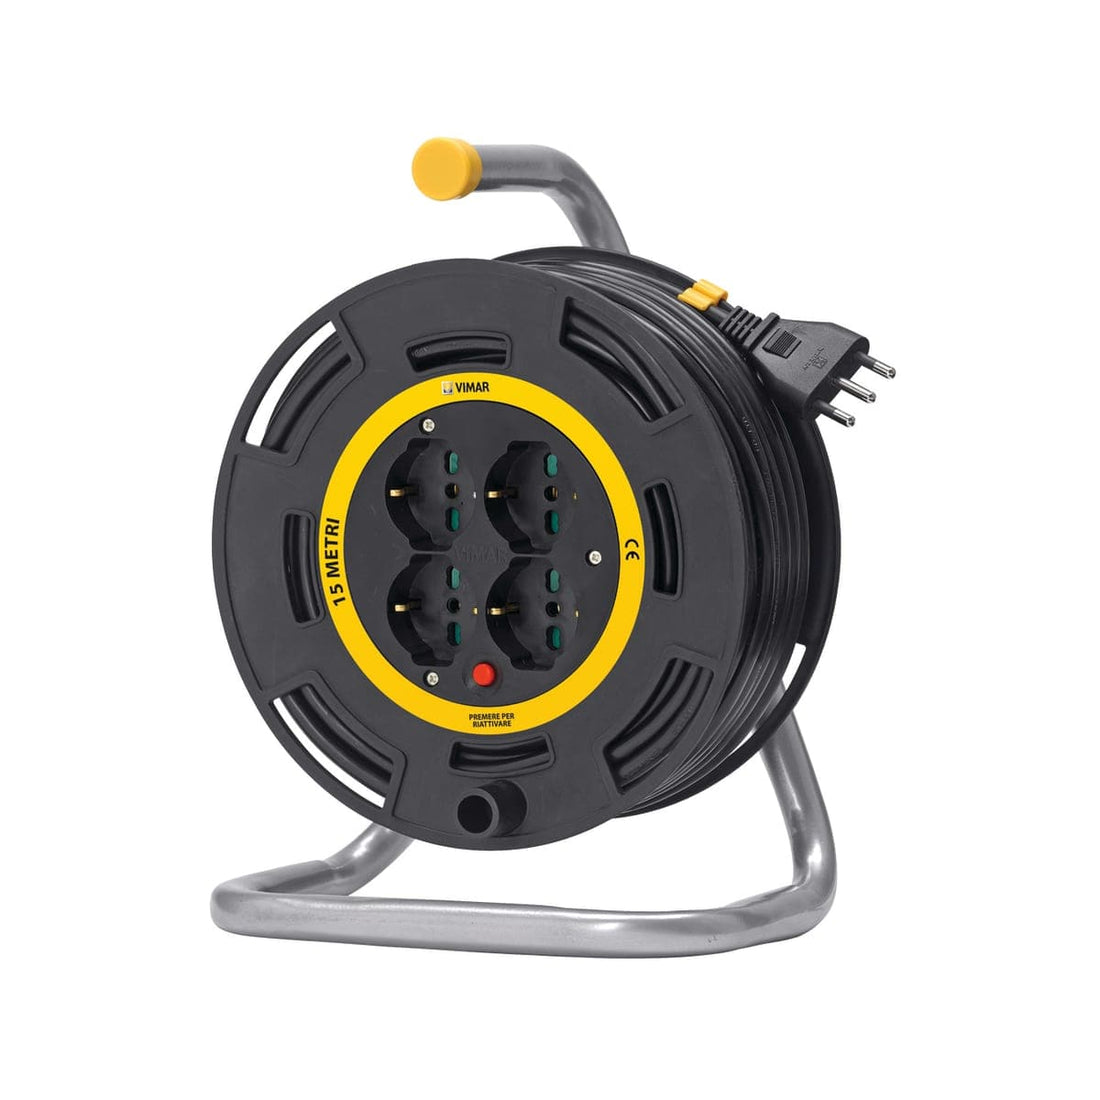 15 M CABLE REEL 16A PLUG 4 UNIVERSAL SOCKETS - best price from Maltashopper.com BR420002866